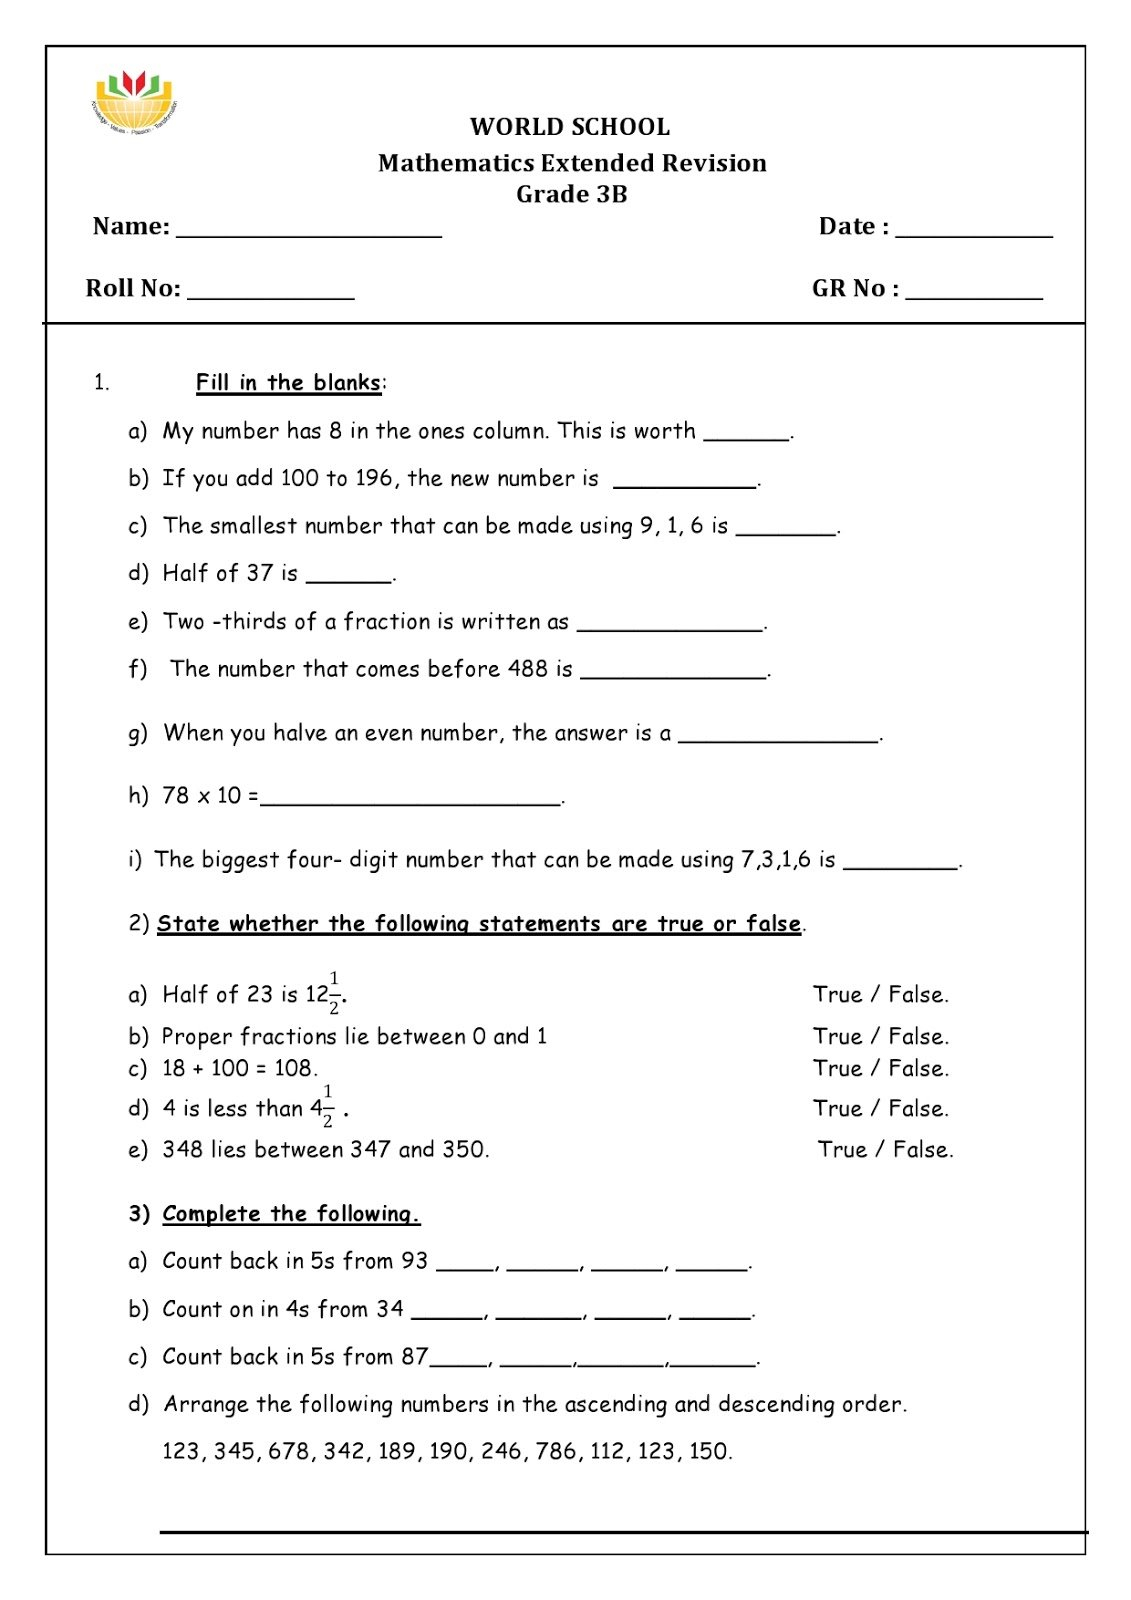 Worksheet Year English Worksheets Learning Games For Olds Context As Well As Tutor Worksheets